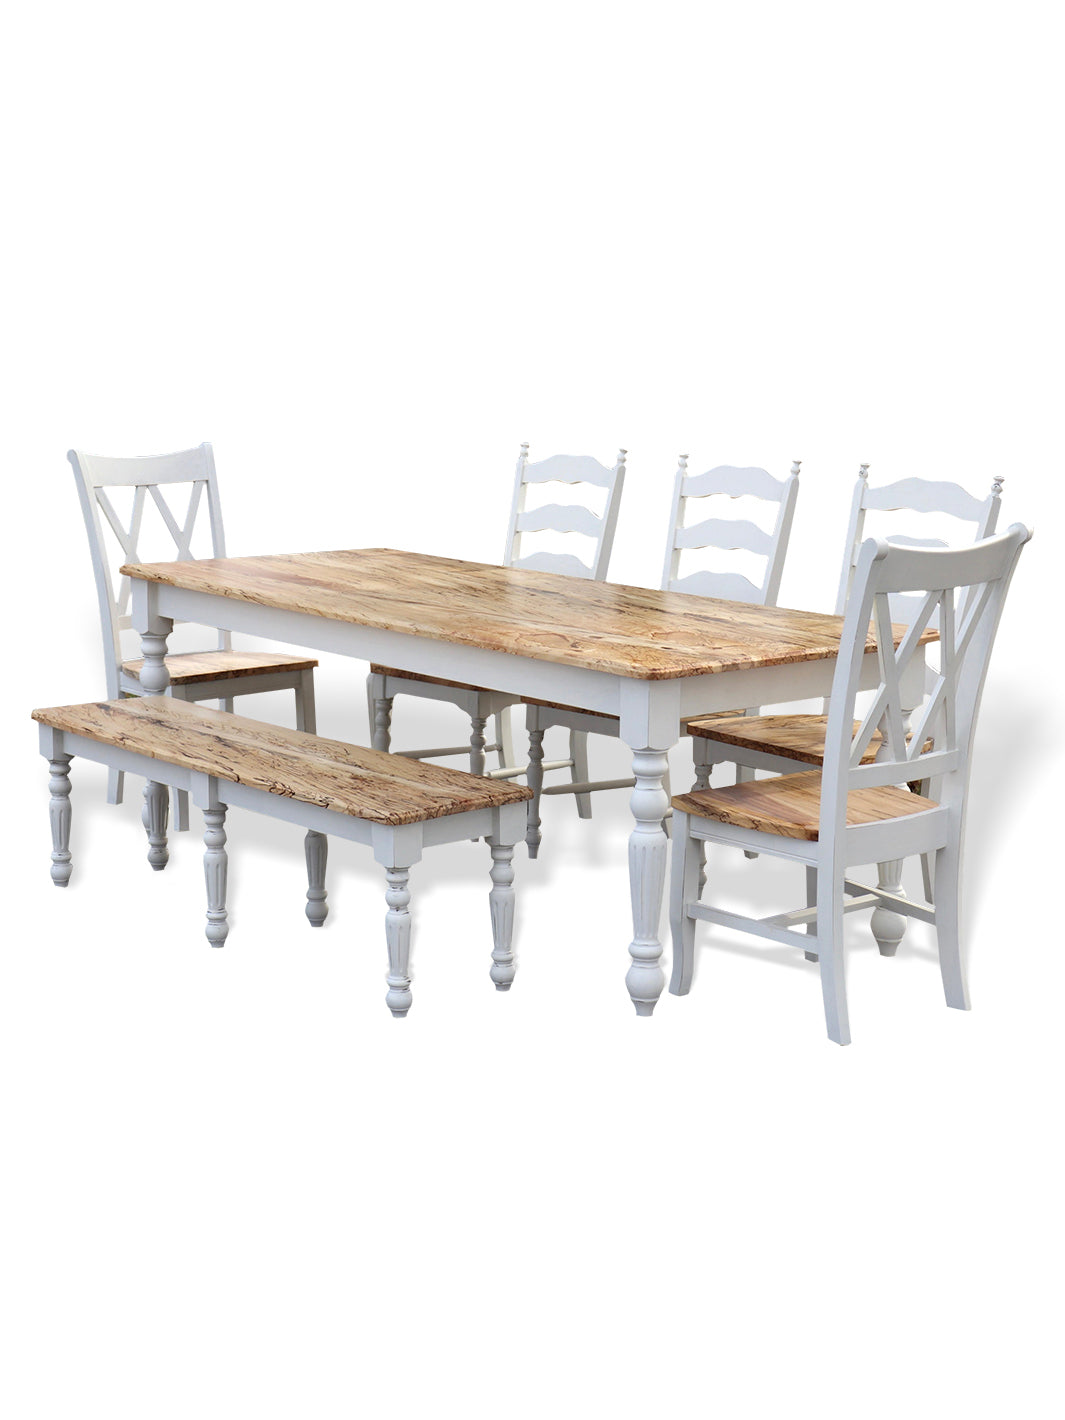 White Spalted Maple Farmhouse Dining Table Set Earthly Comfort Dining Tables ECH1867